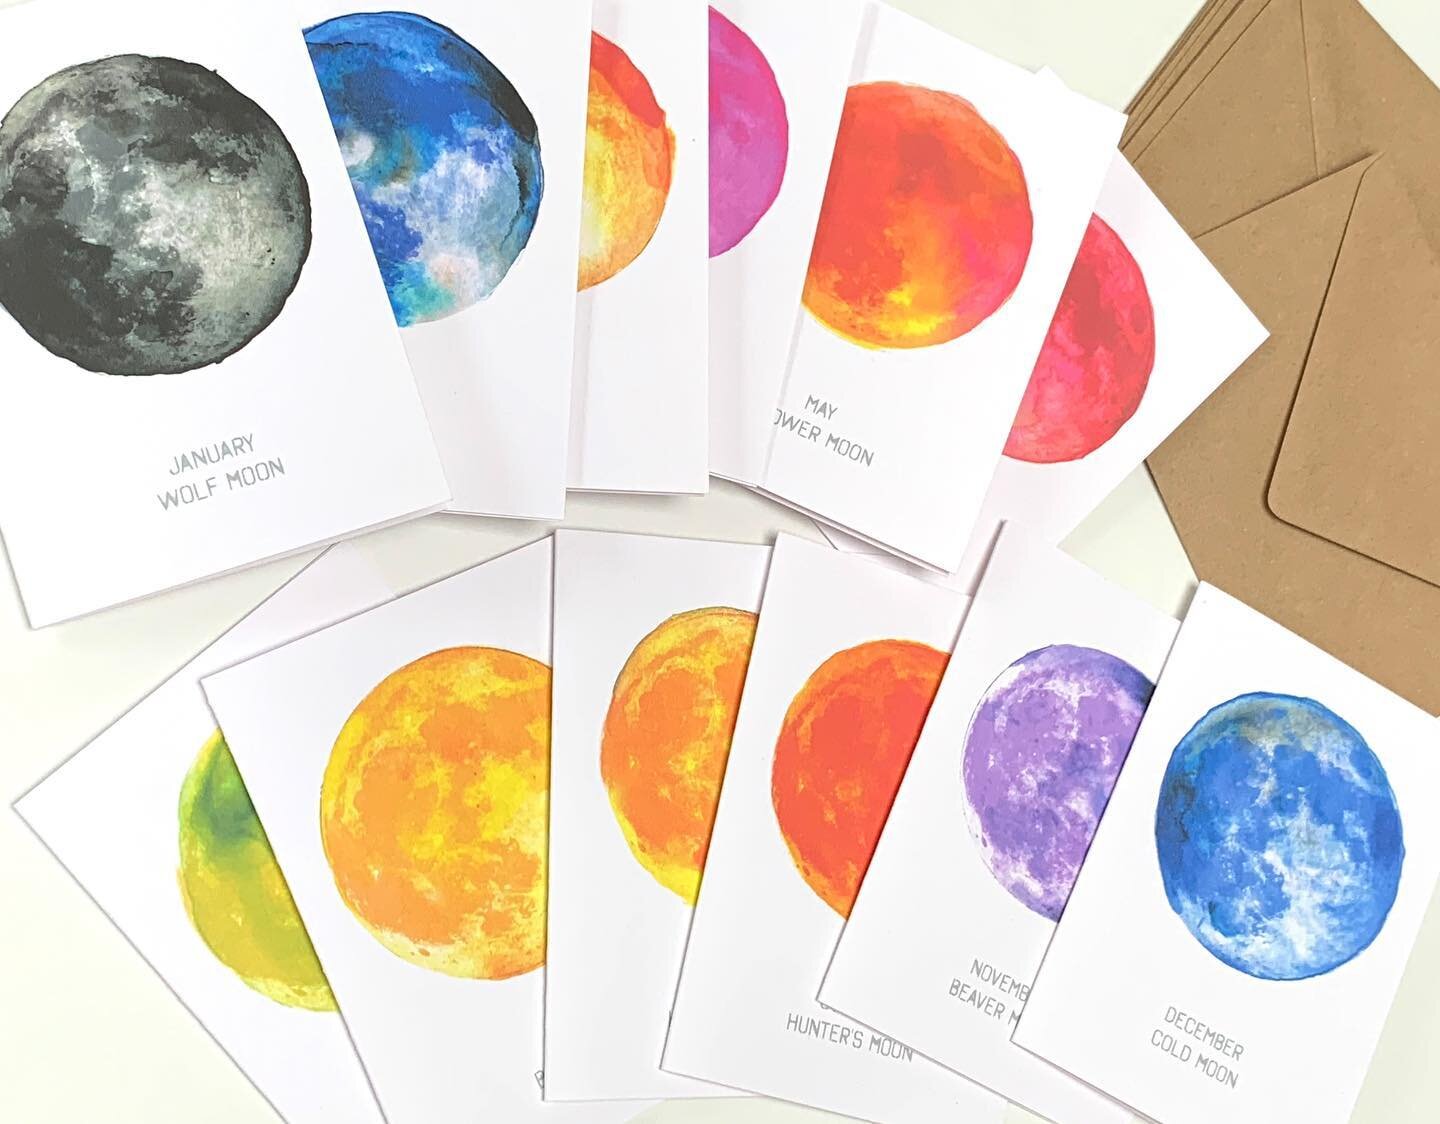 Now on Etsy! After the success of trialling our Moon Month cards at the @solocraftfair shop, we have now listed them on Etsy. A set of 12 cards of all the moons of the year, perfect for birthdays, anniversaries, wedding cards - so many uses! Head to 